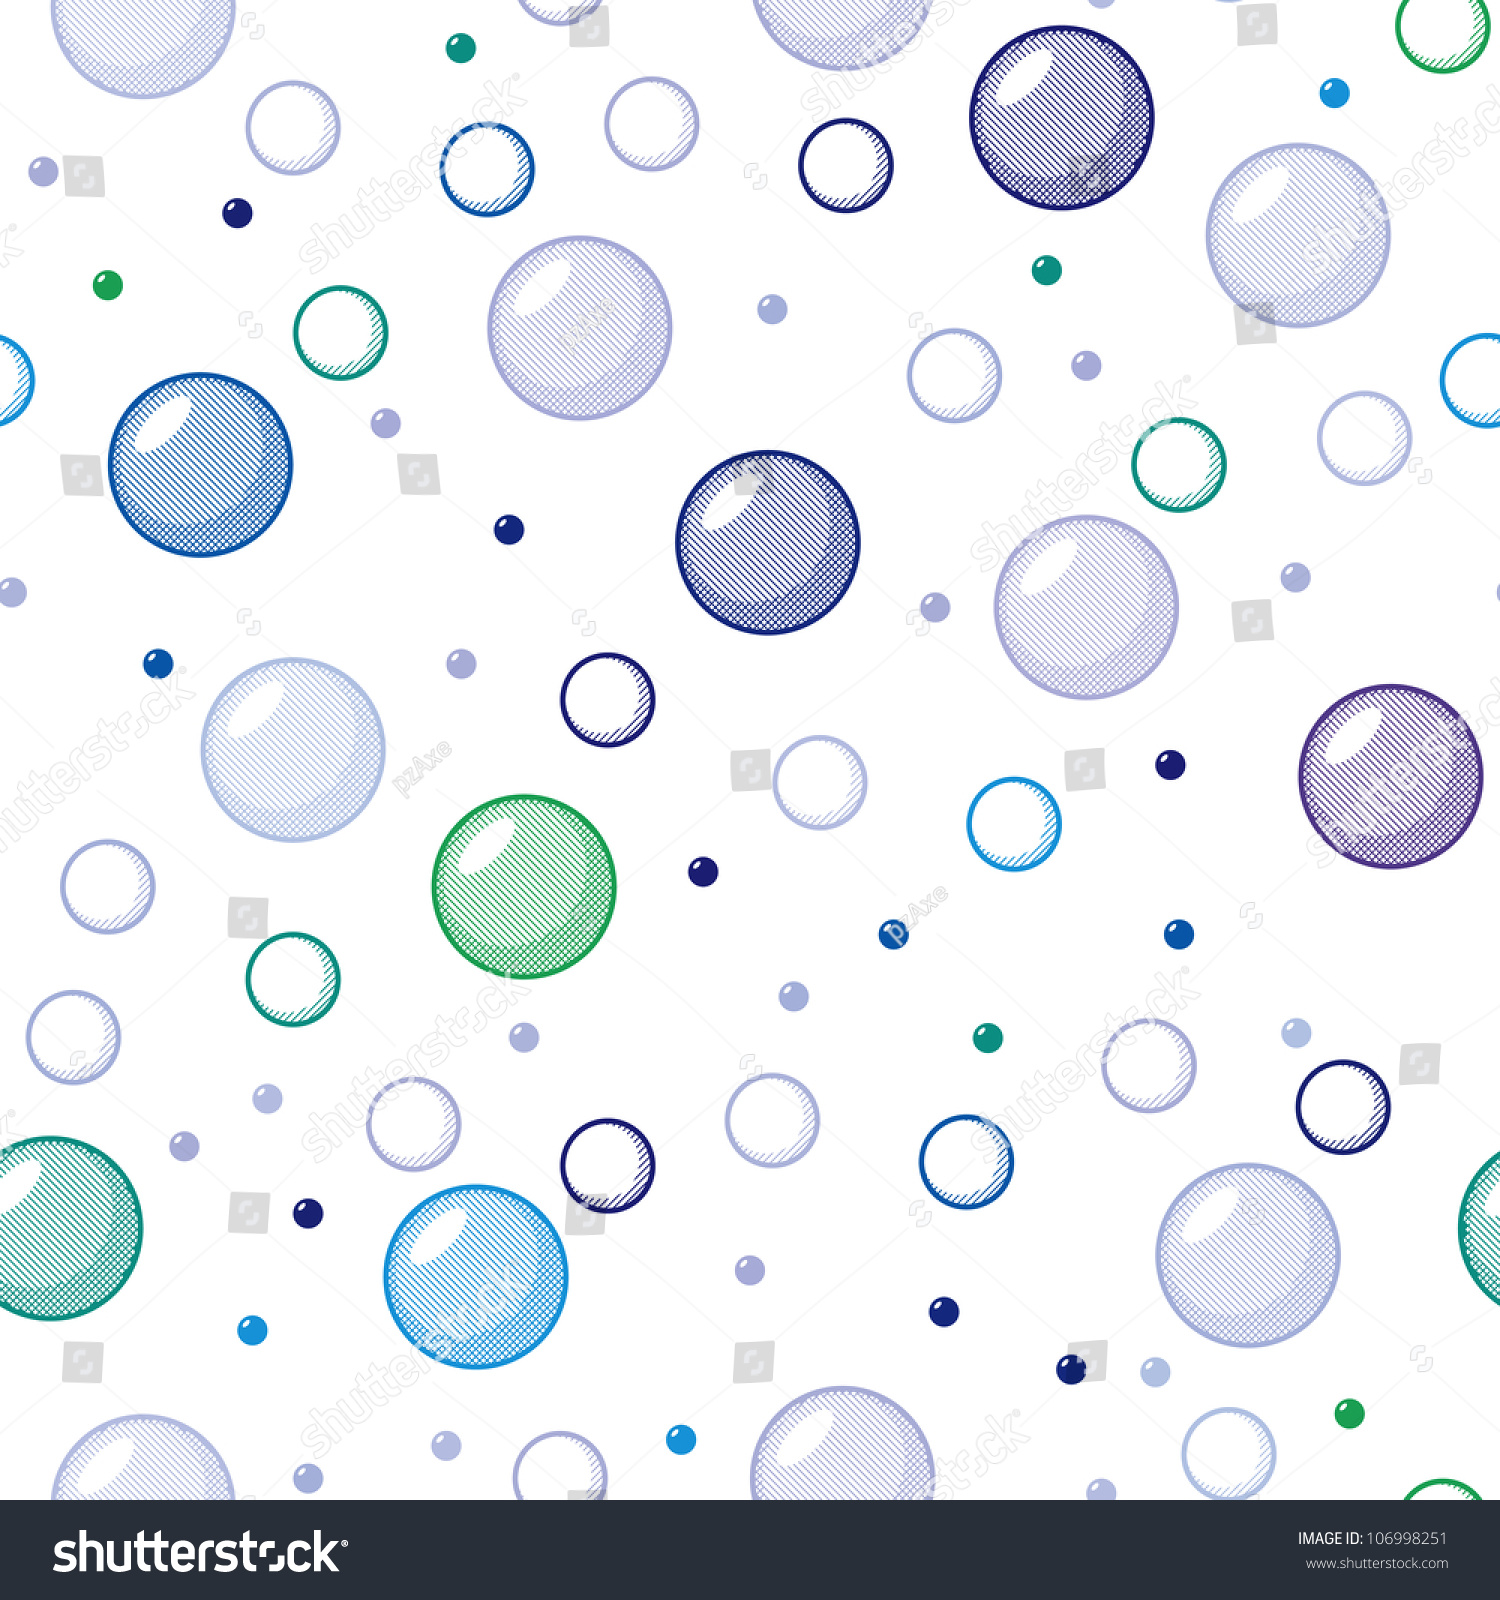 Abstract Seamless Texture - Bubbles On A White Background Stock Photo ...